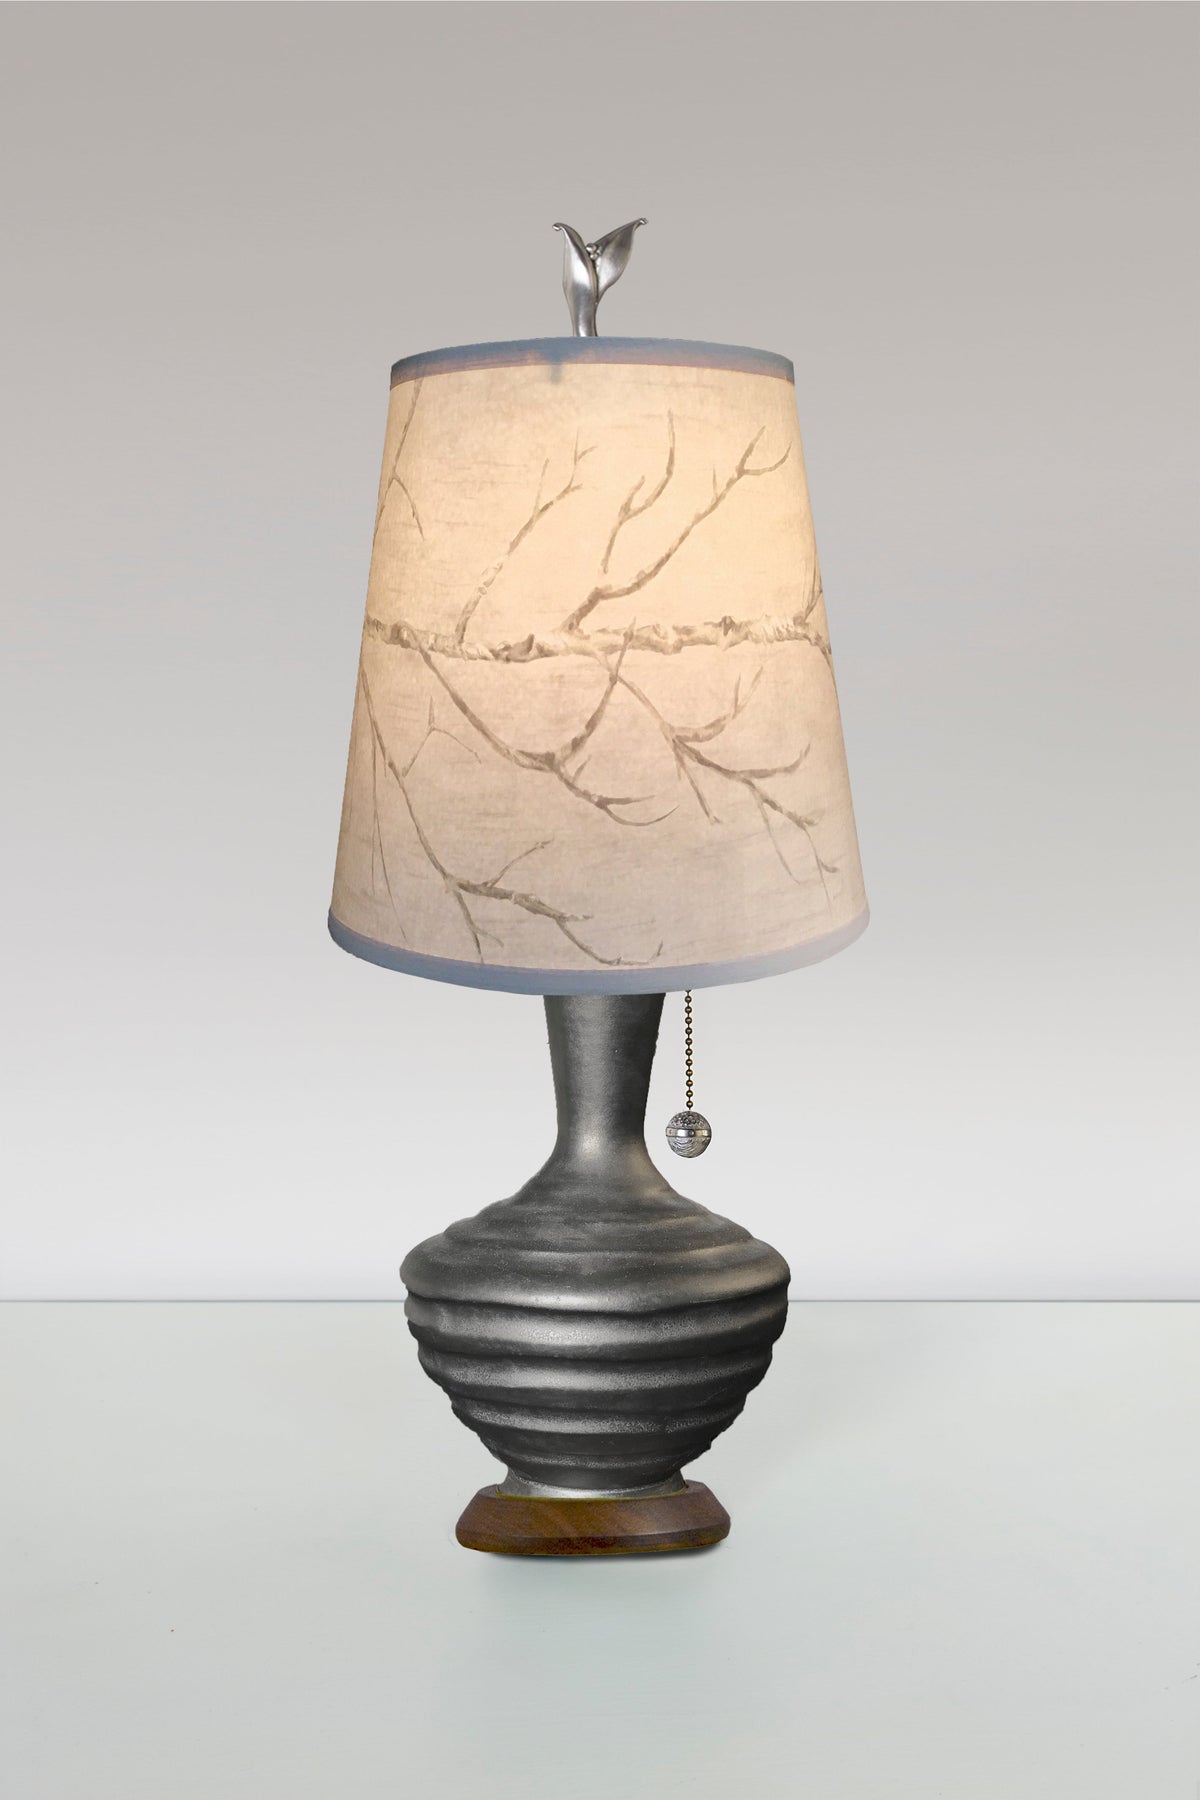 Janna Ugone &amp; Co Table Lamps Ceramic Table Lamp with Small Drum Shade in Sweeping Branch